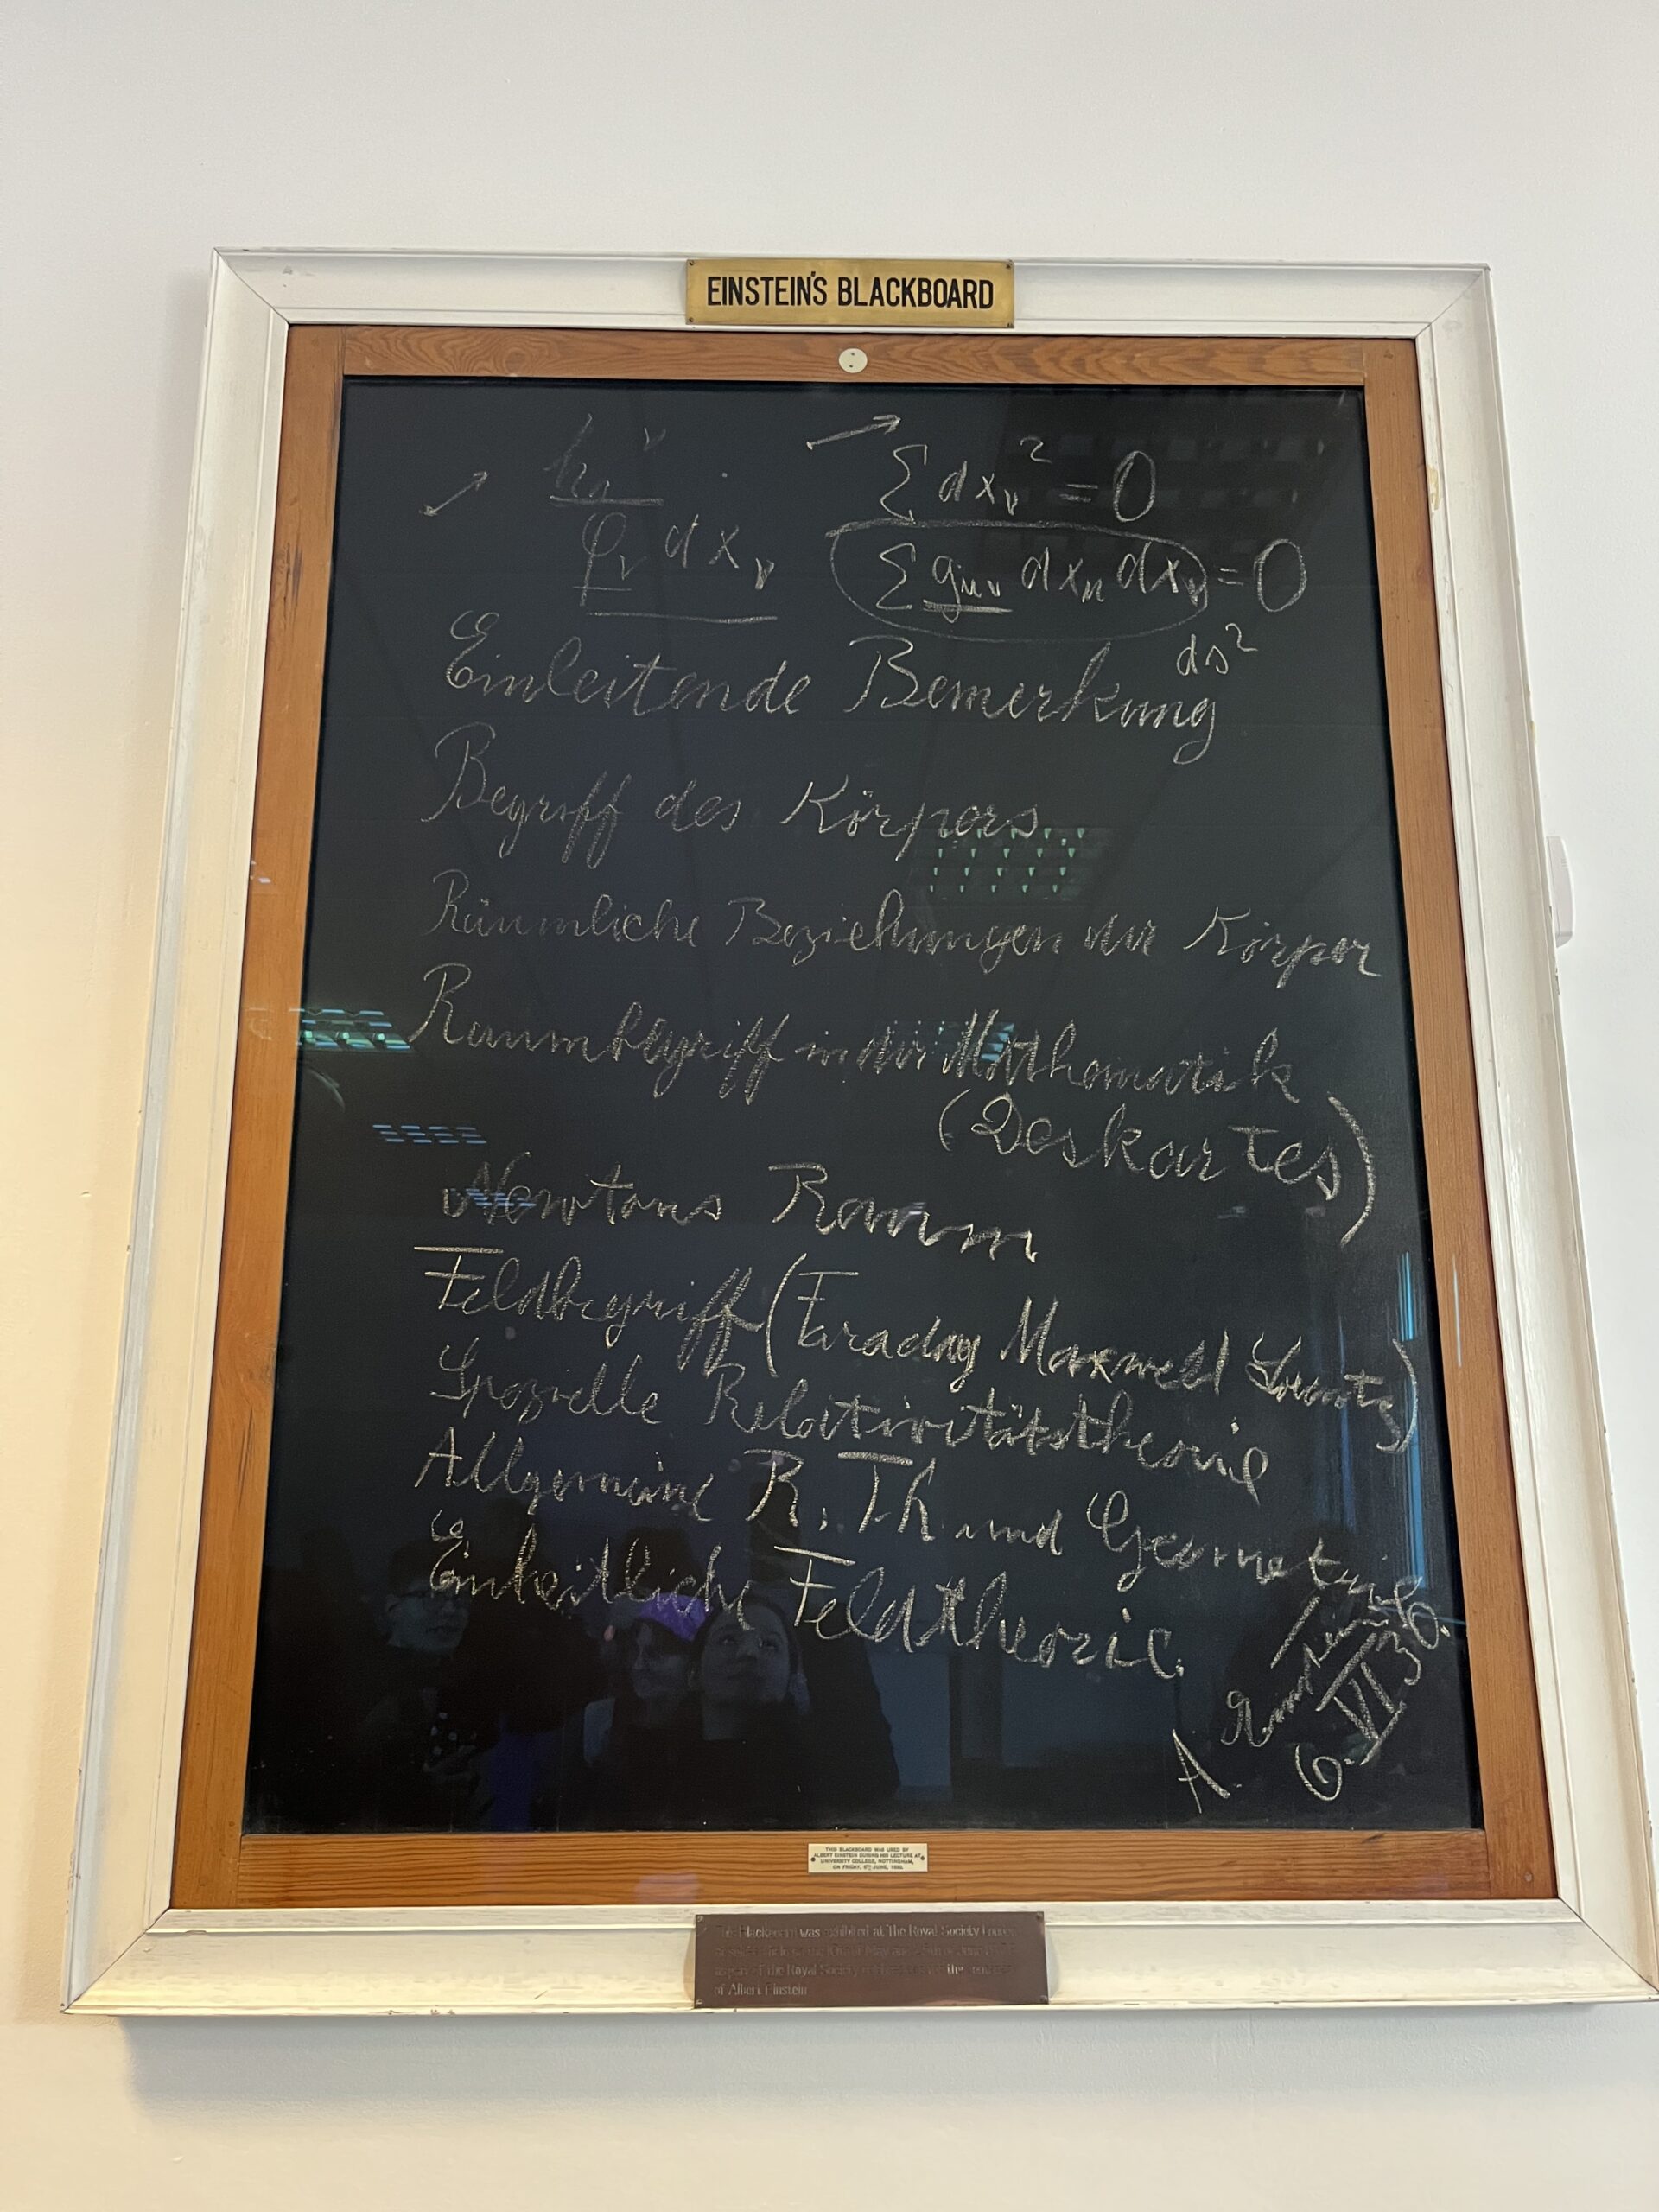 A cut out and framed piece of blackboard that Einstein wrote on. The frame is white and says “Einstein’s Blackboard” in black on a gold little plaque on the top. The blackboard is written on with white chalk. There is some equations written on the top of the Blackboard and the rest of the blackboard is words written in German. 